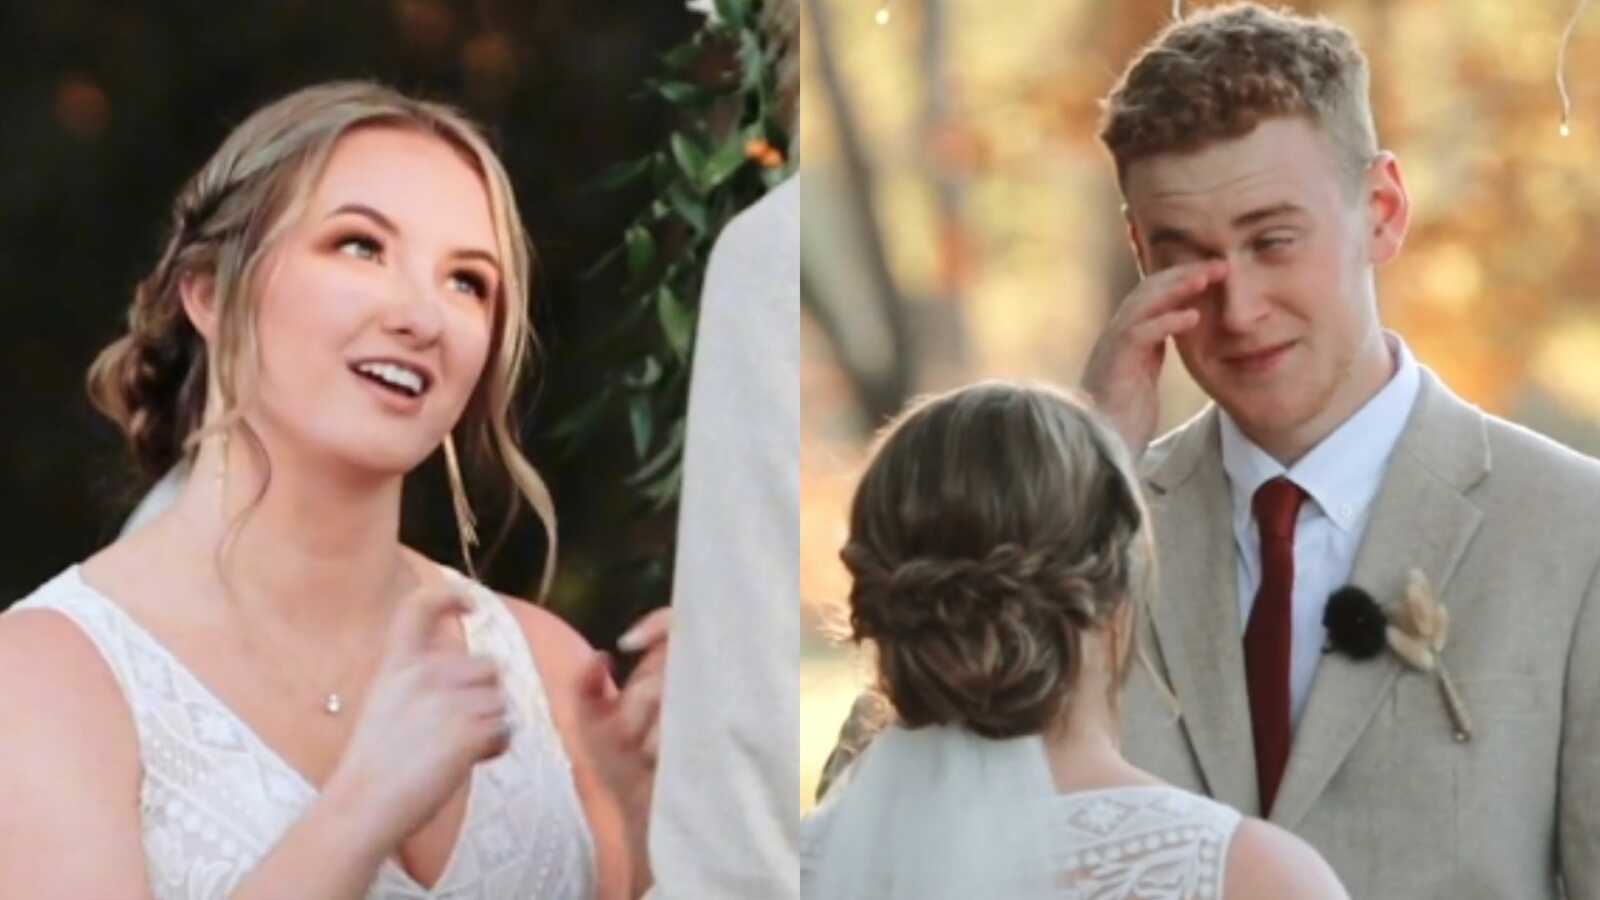 Bride on wedding day signs her vows to husband to surprise deaf in-laws